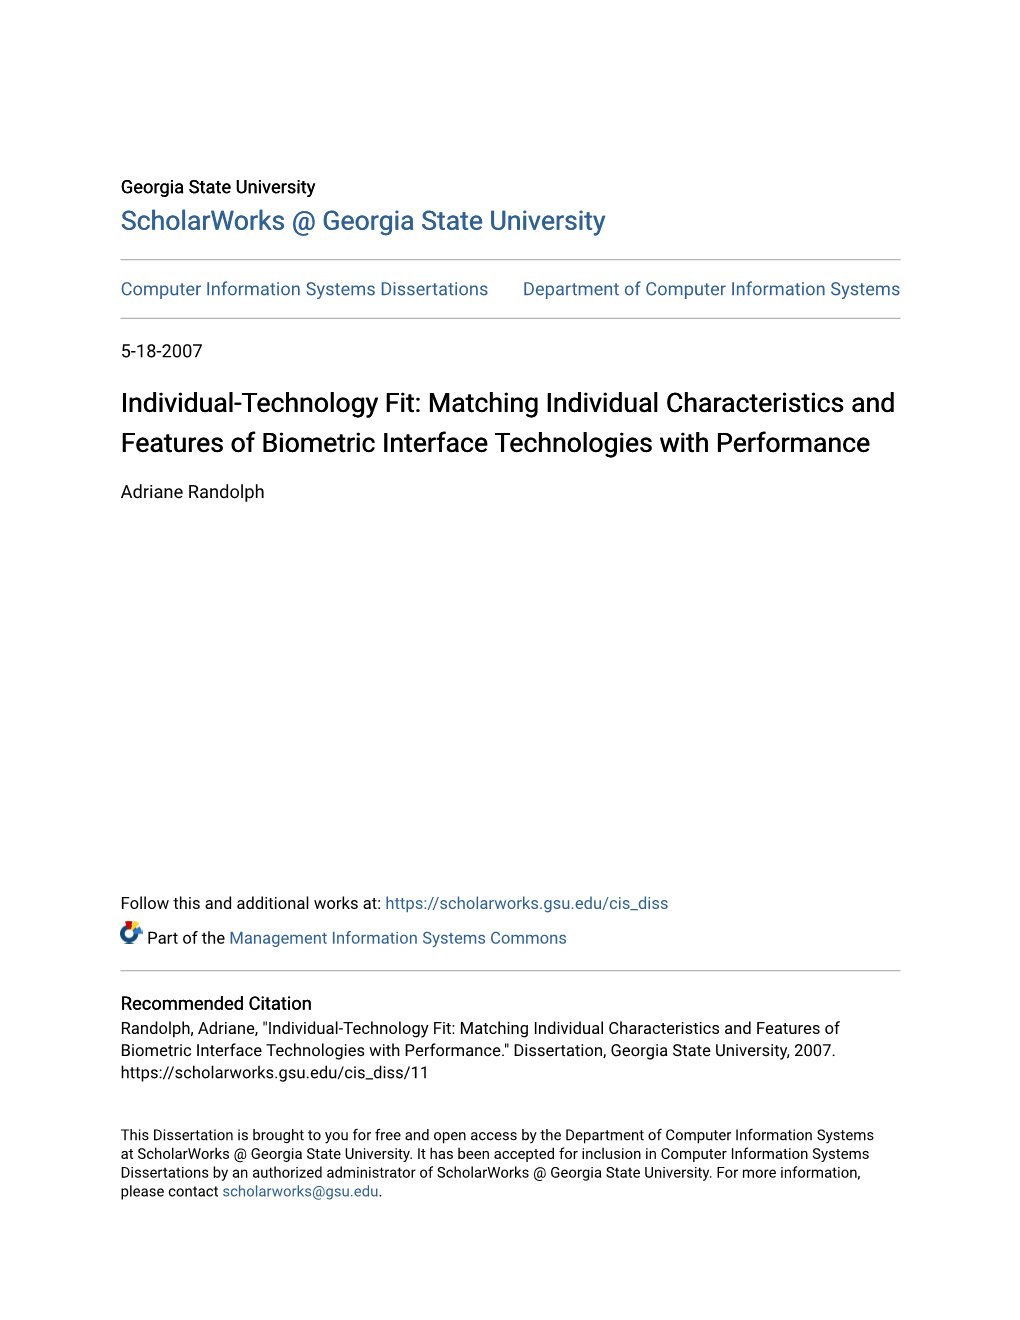 Individual-Technology Fit: Matching Individual Characteristics and Features of Biometric Interface Technologies with Performance